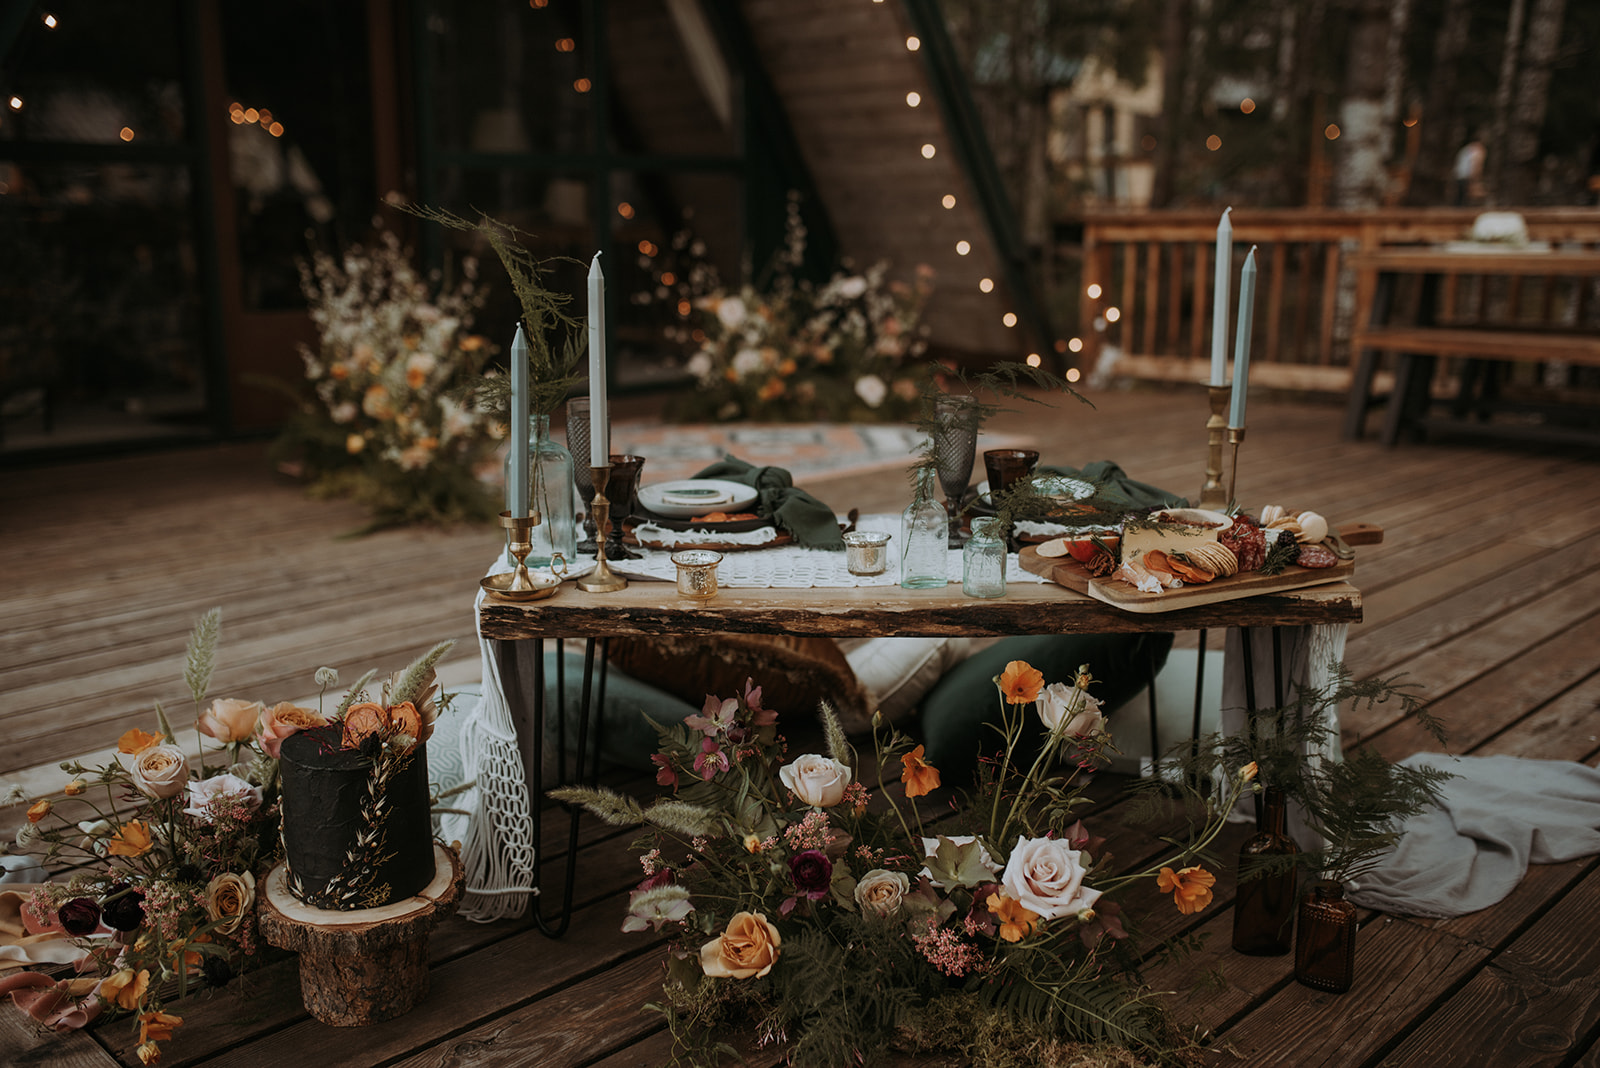 Mount Rainier elopement photographer captures intimate moment at cozy a-frame cabin, Woodsy wedding details, table scape